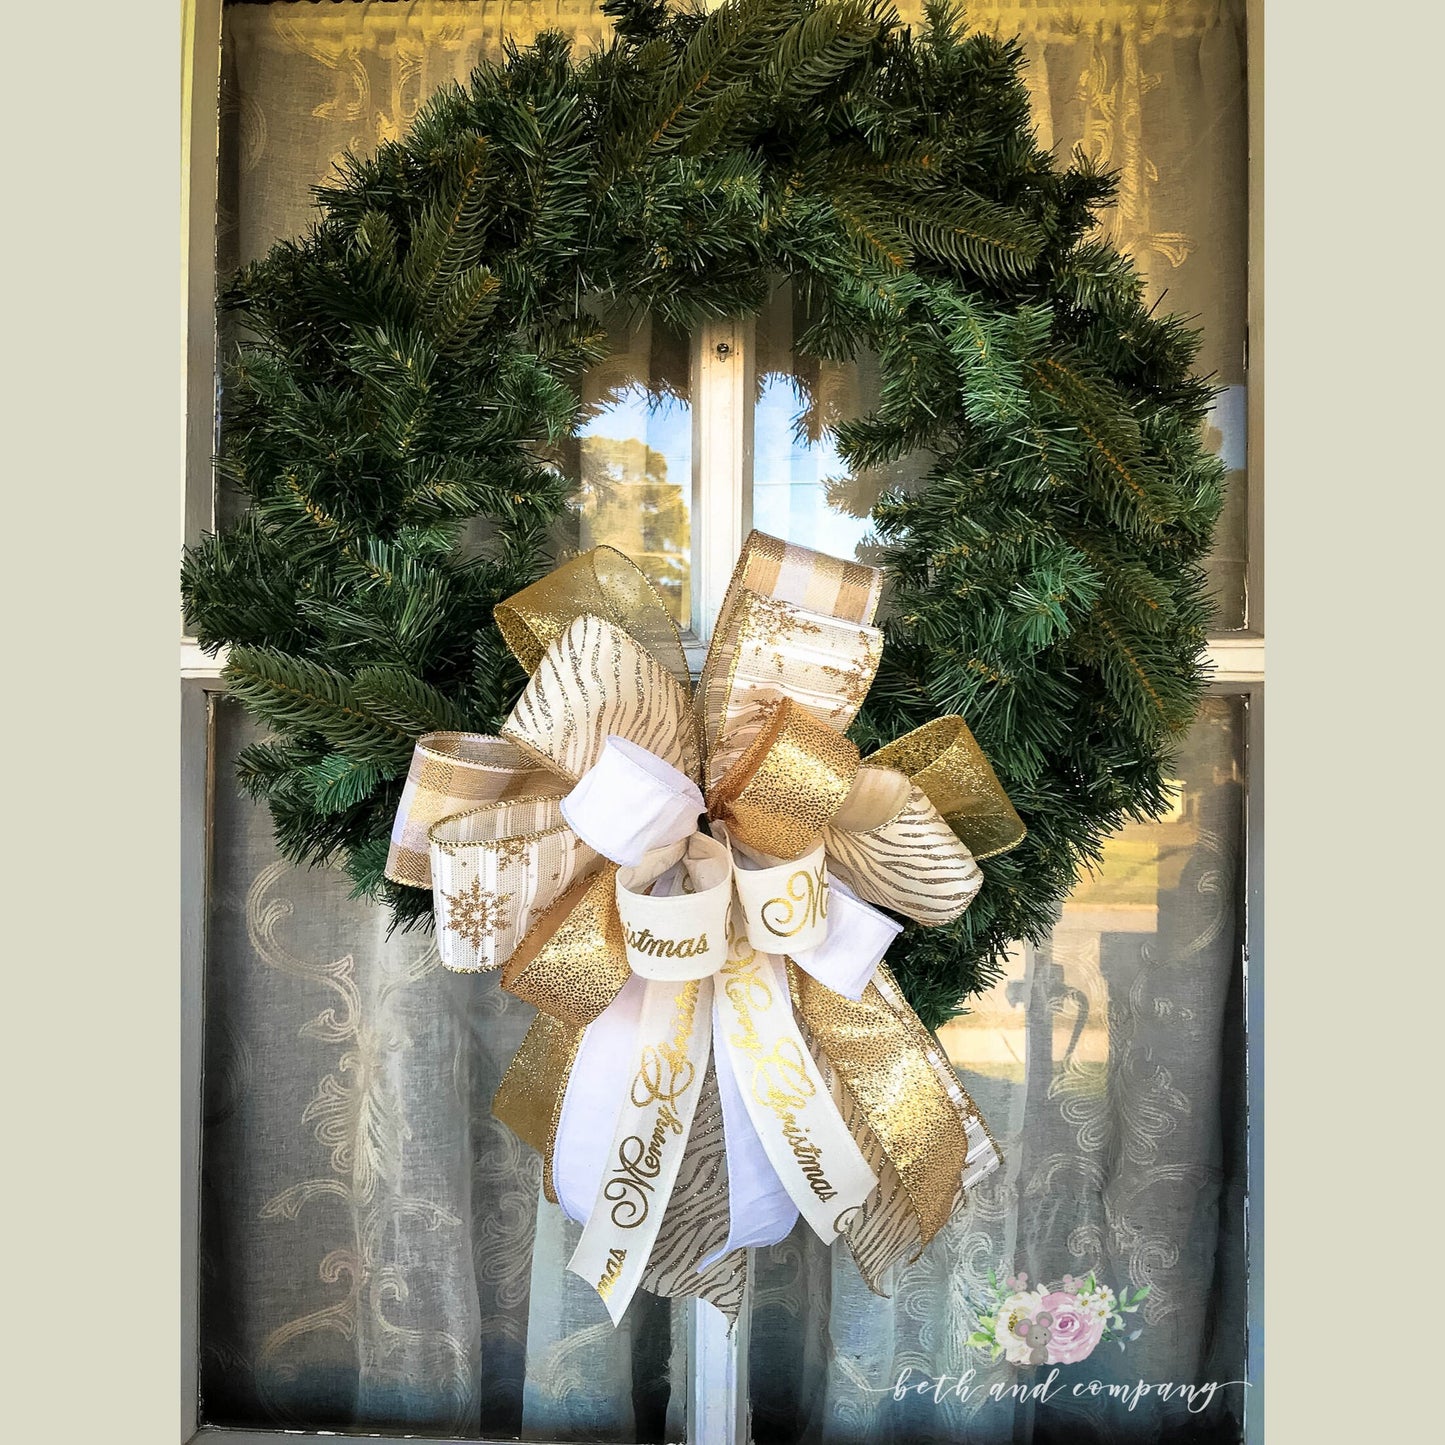 Christmas Bow, Gold and White Christmas Bow, Gold Tree Topper, Lantern Bow